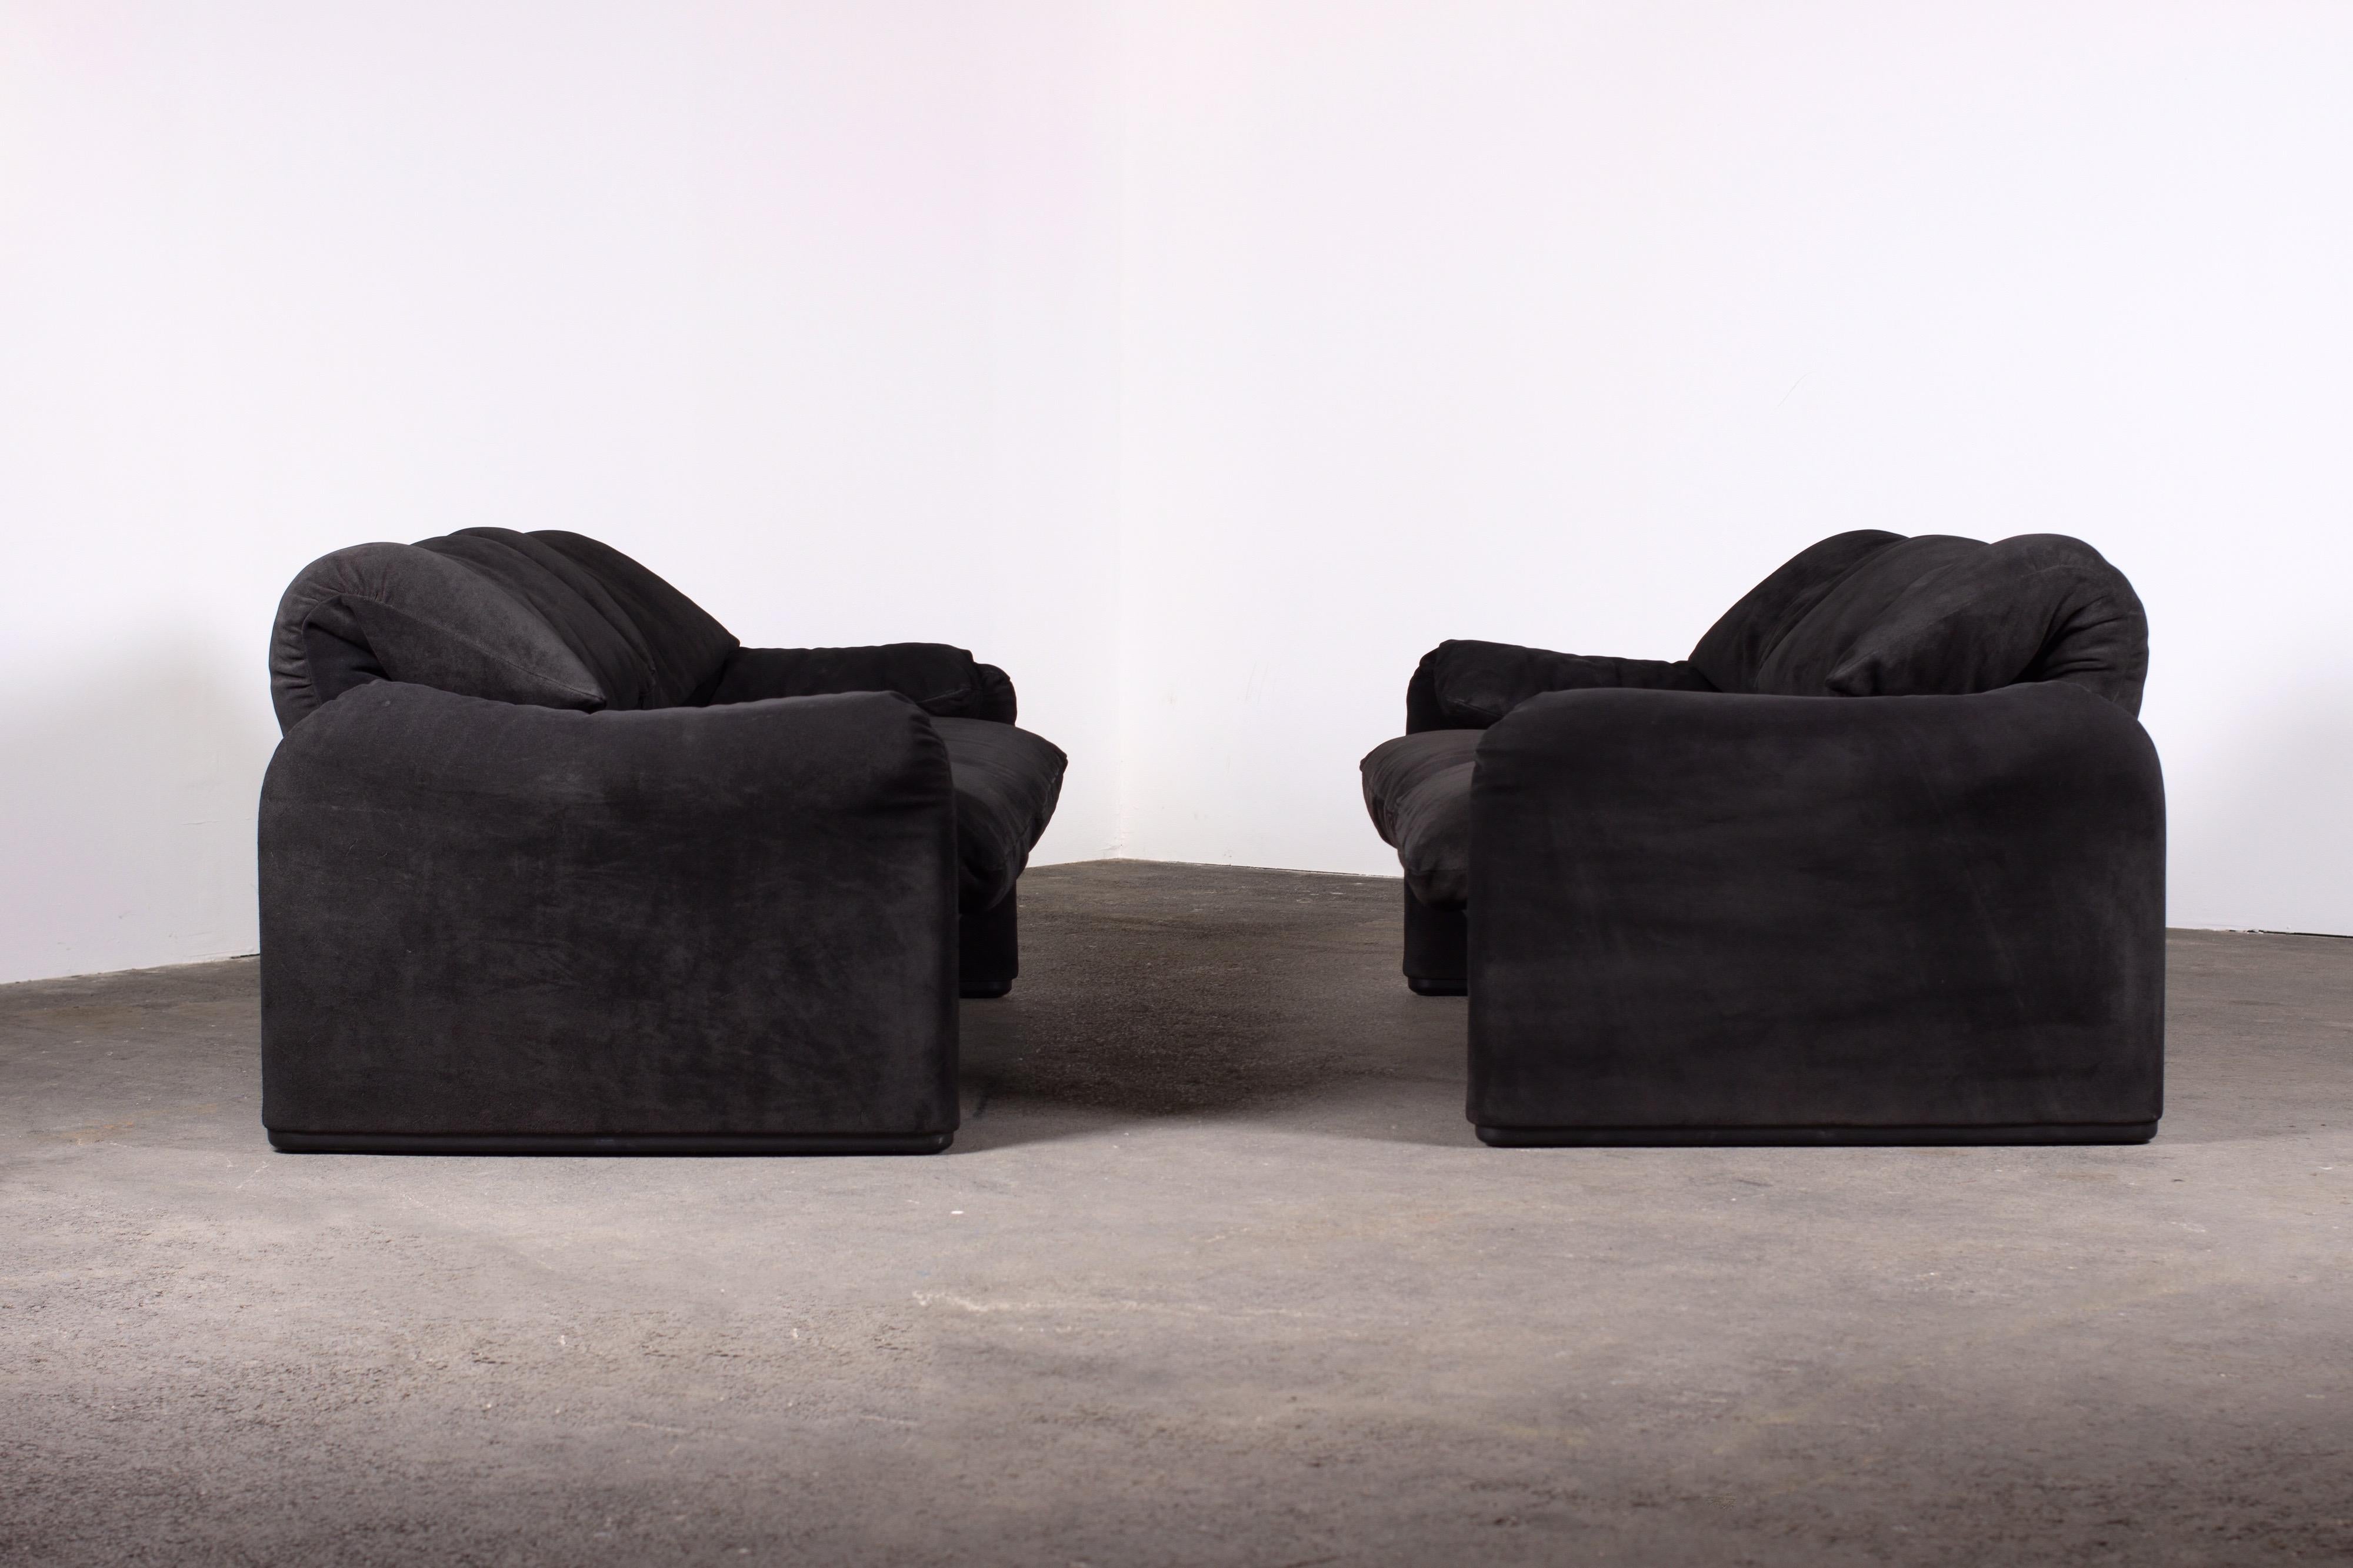 Italian Pair of Black Suede 2-Seater Maralunga Sofas by Vico Magistretti for Cassina